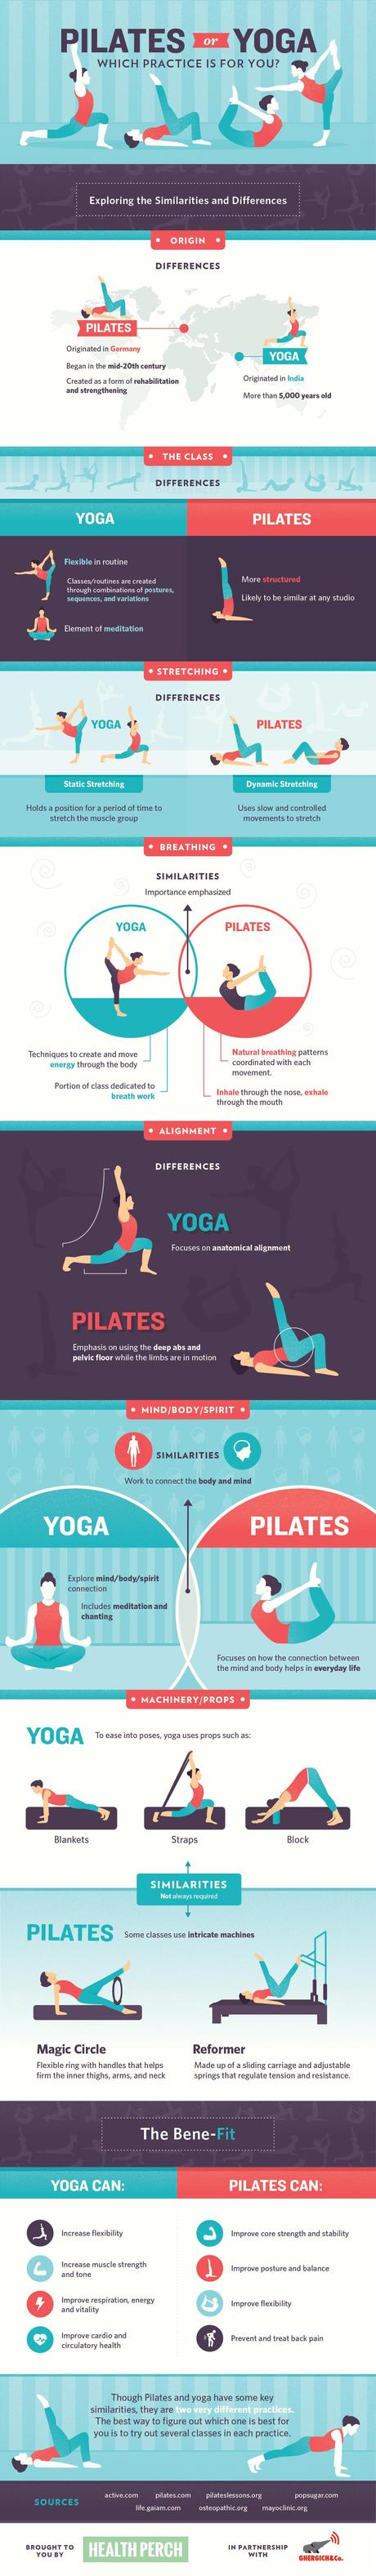 Pilates or Yoga: Which Practice is for You?